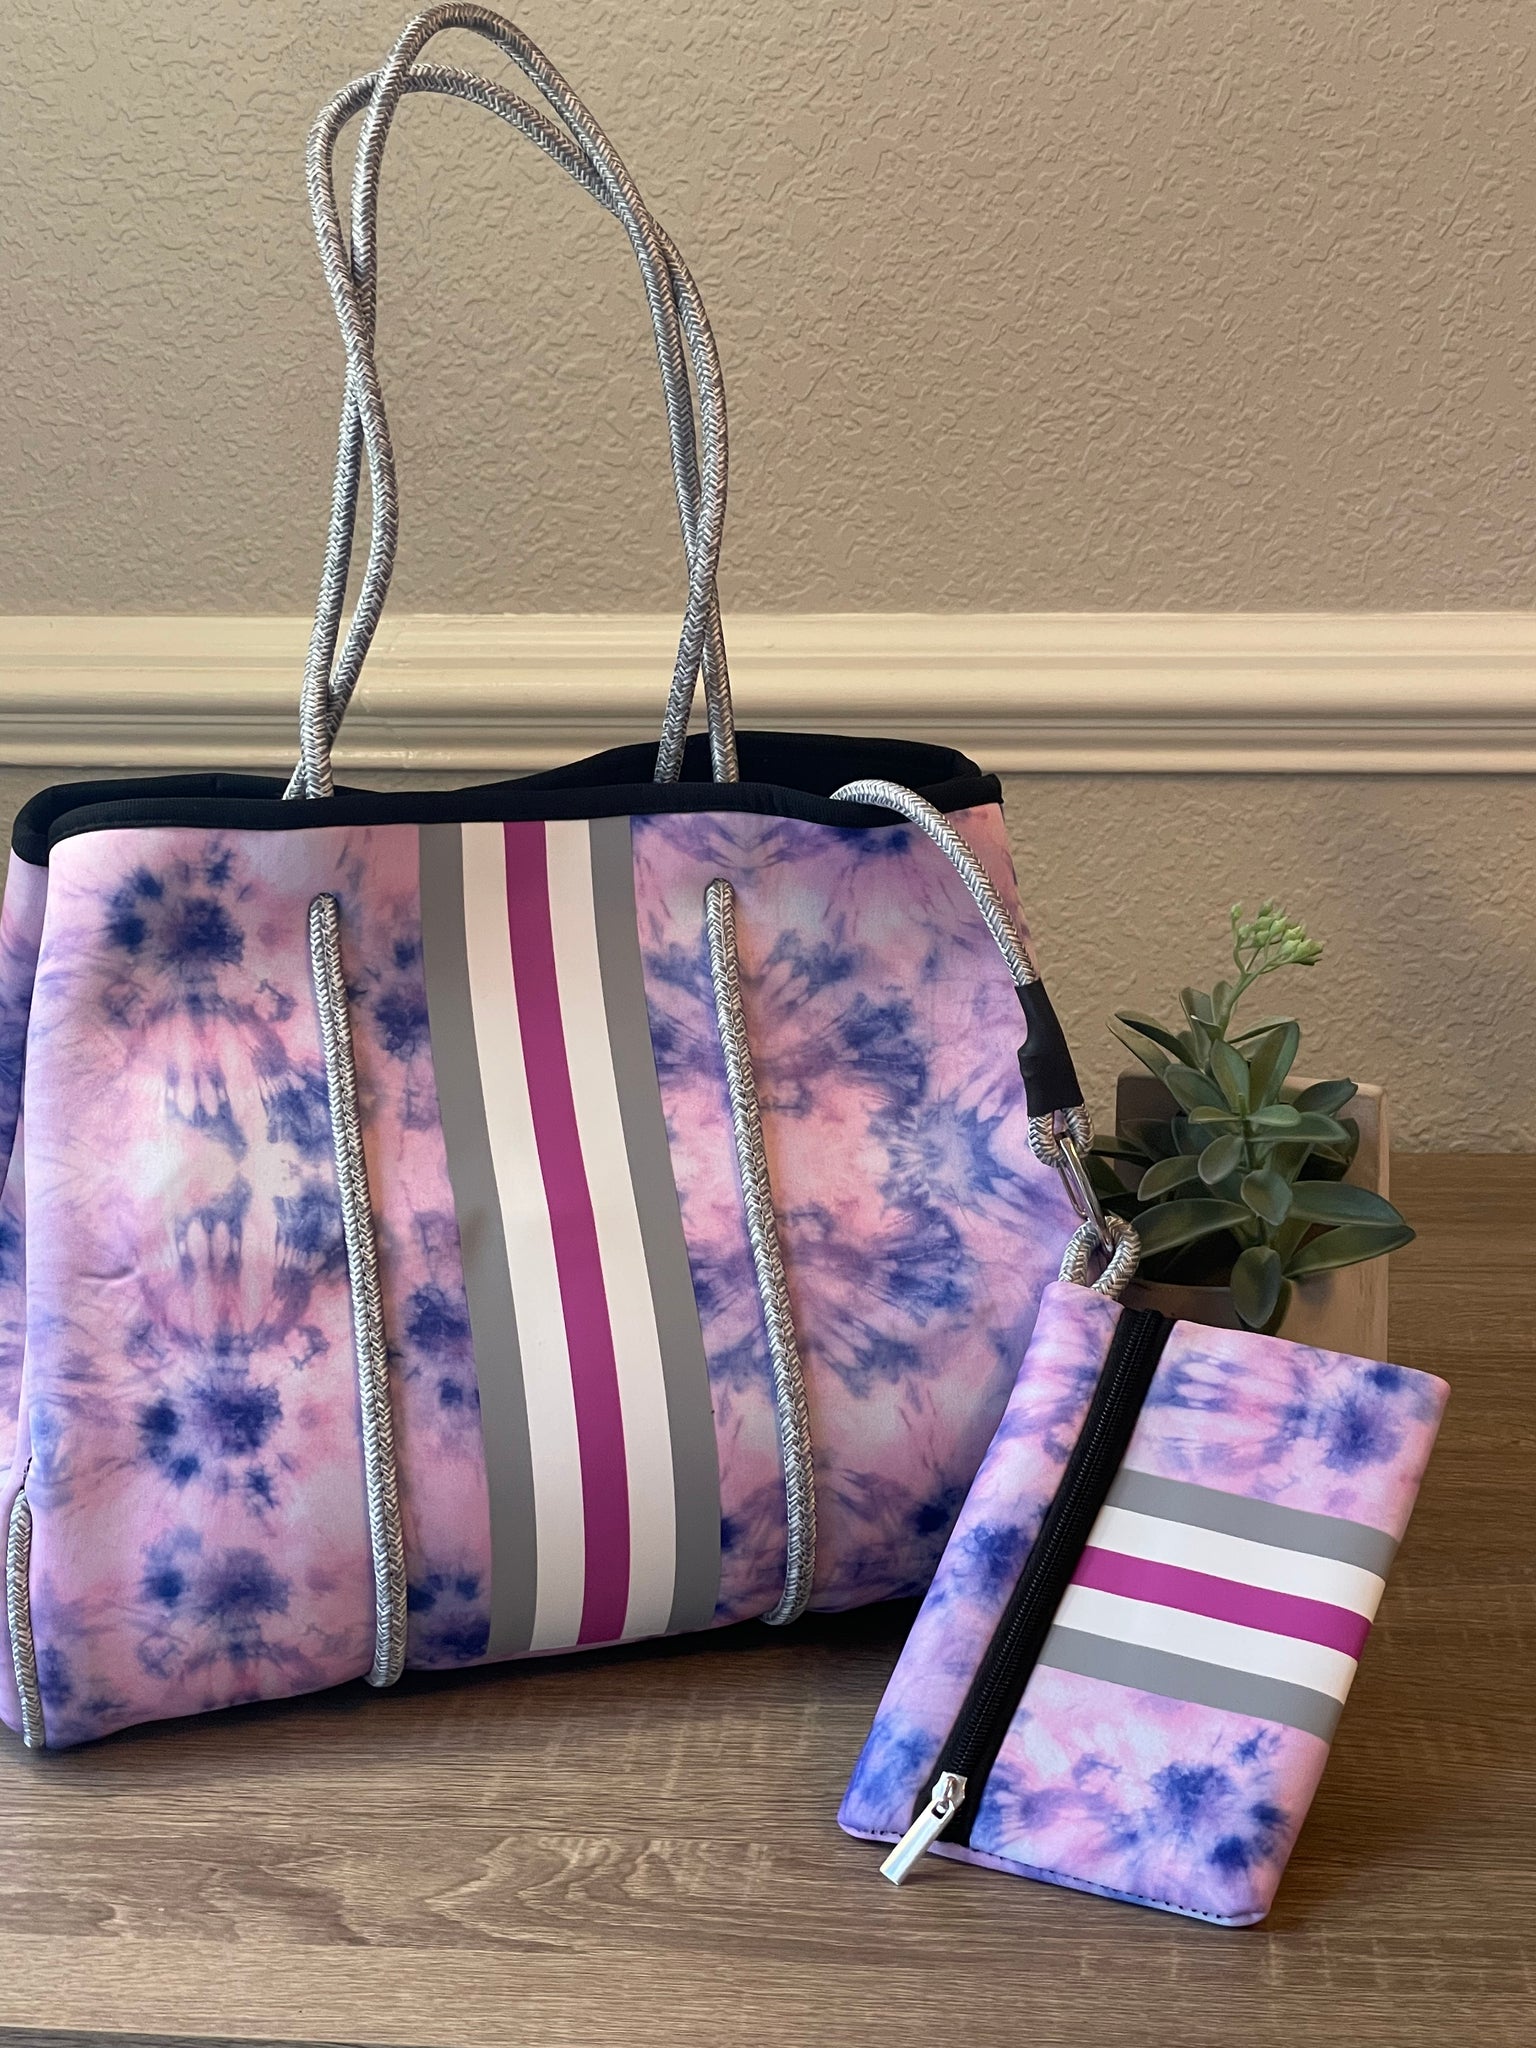 Neoprene Tote Bag Pink/Blue Ombre